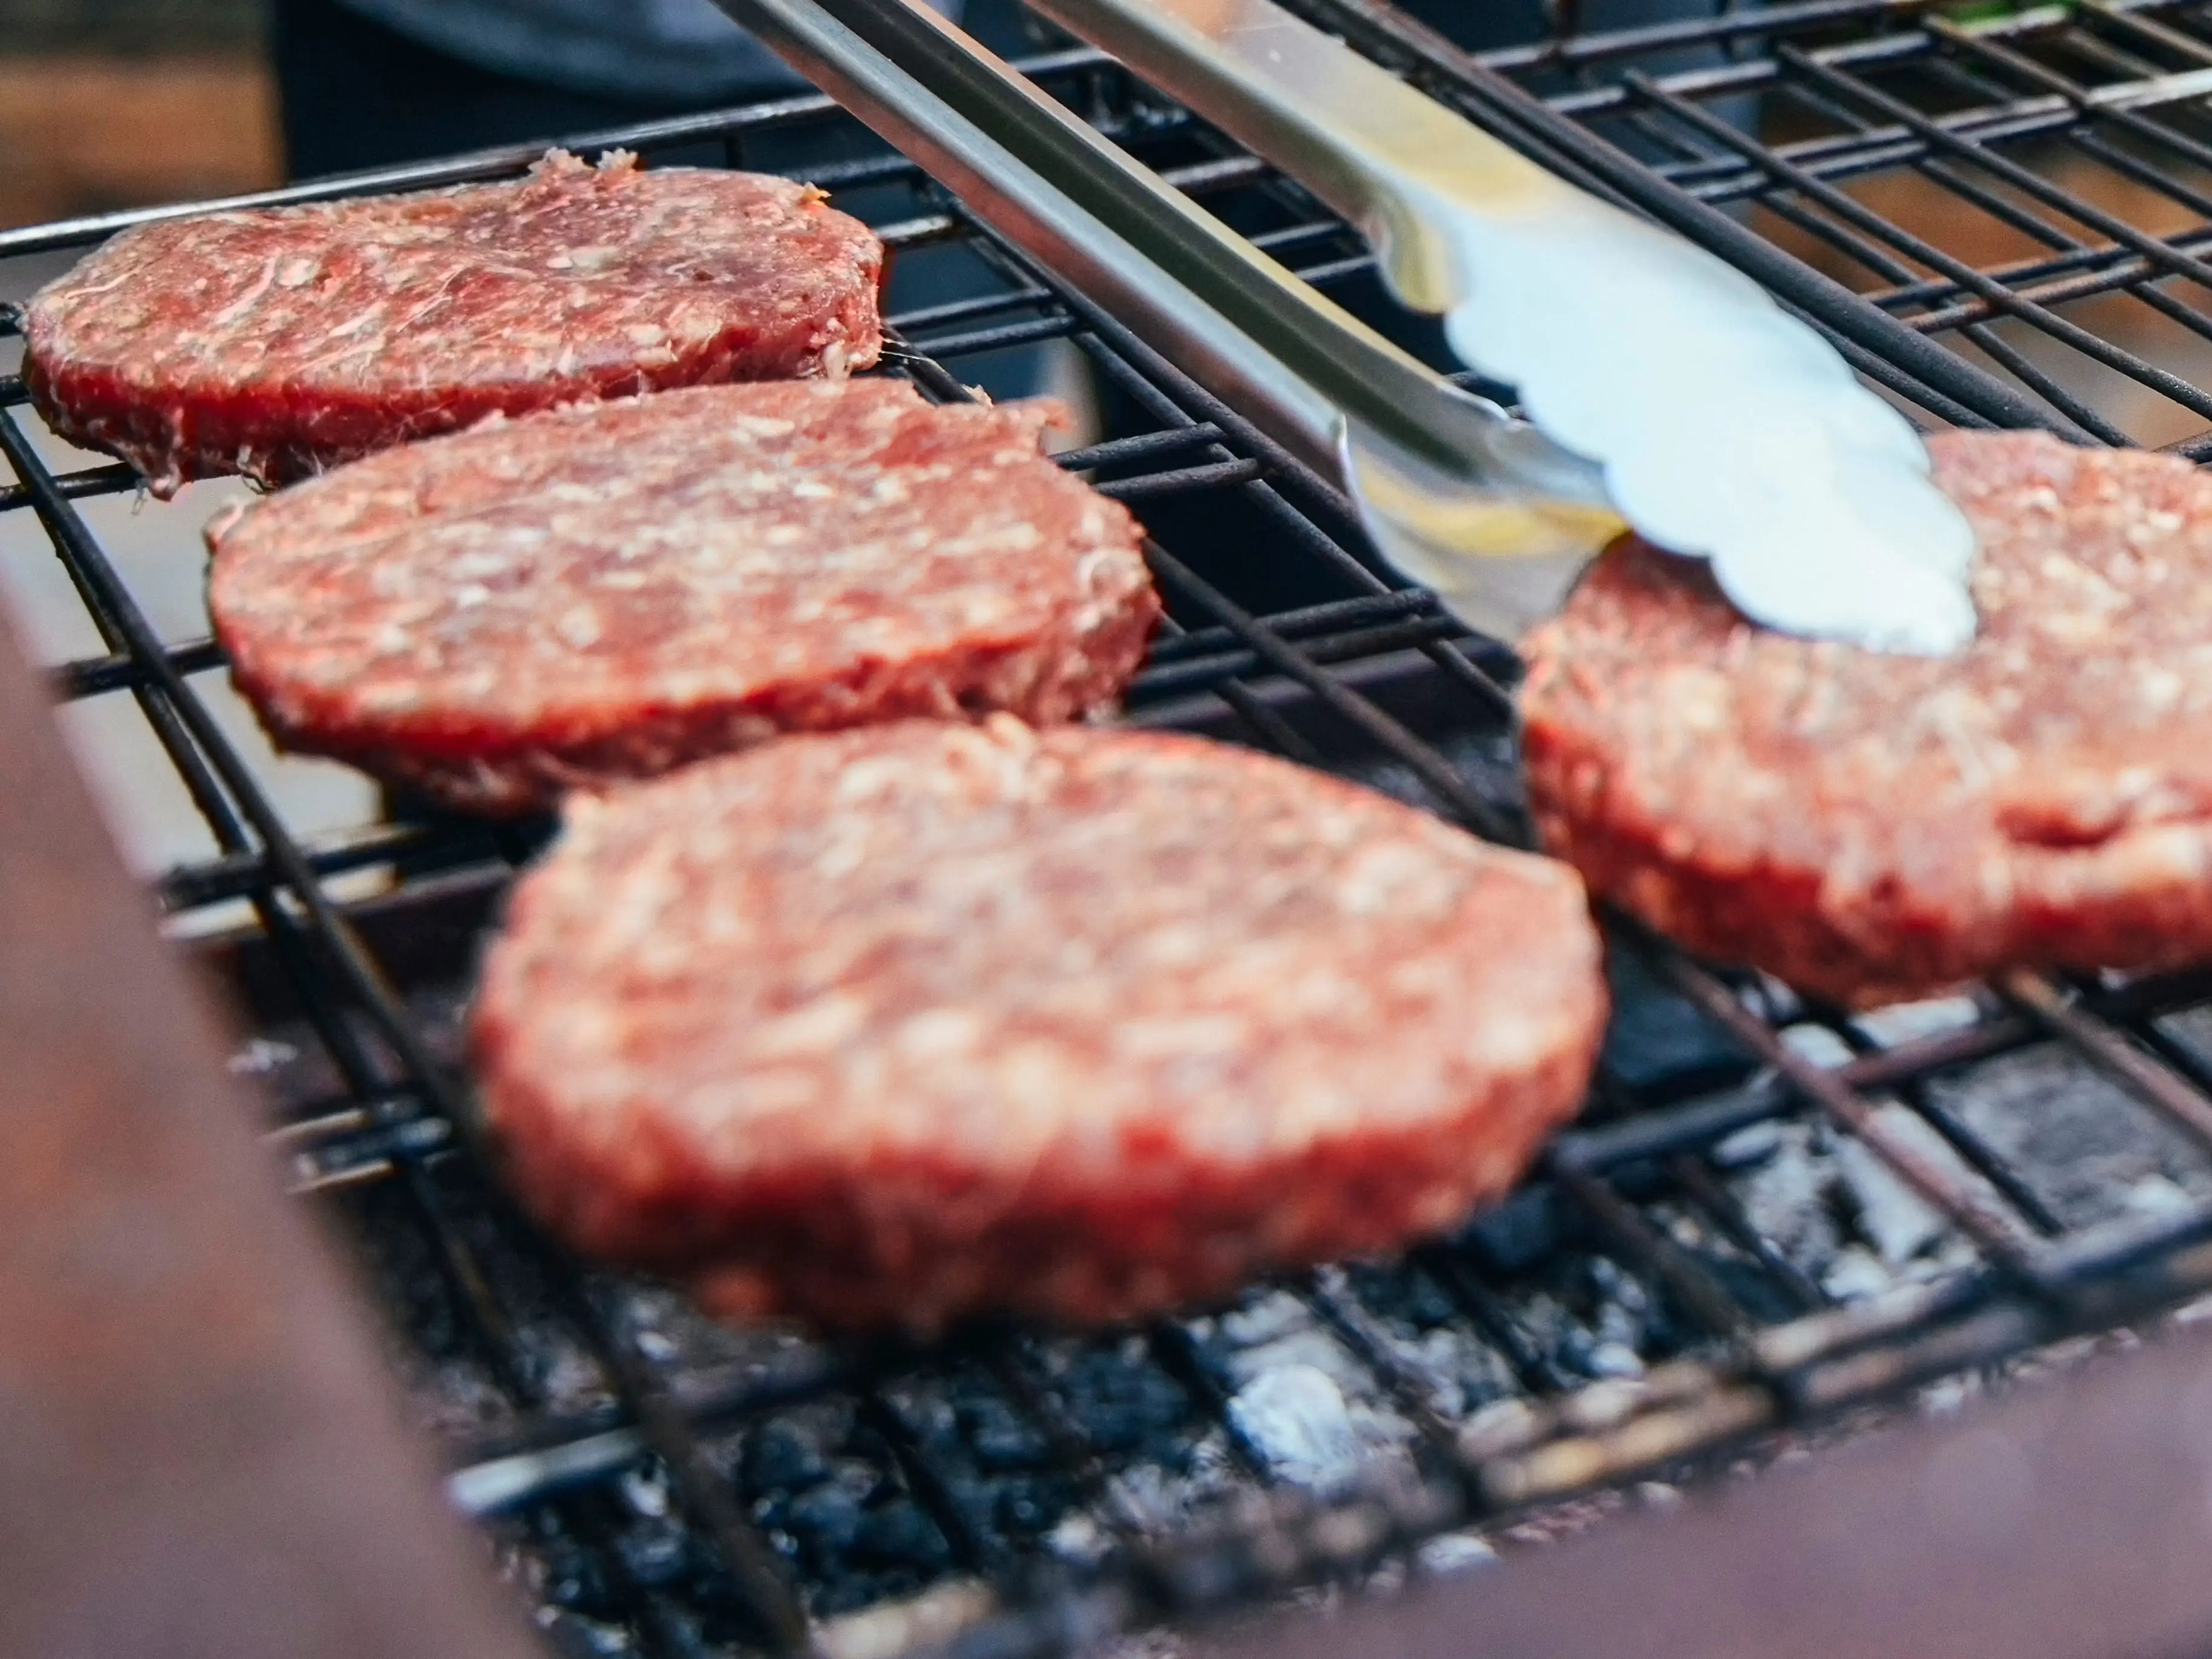 Pay attention to the temperature of your burgers.